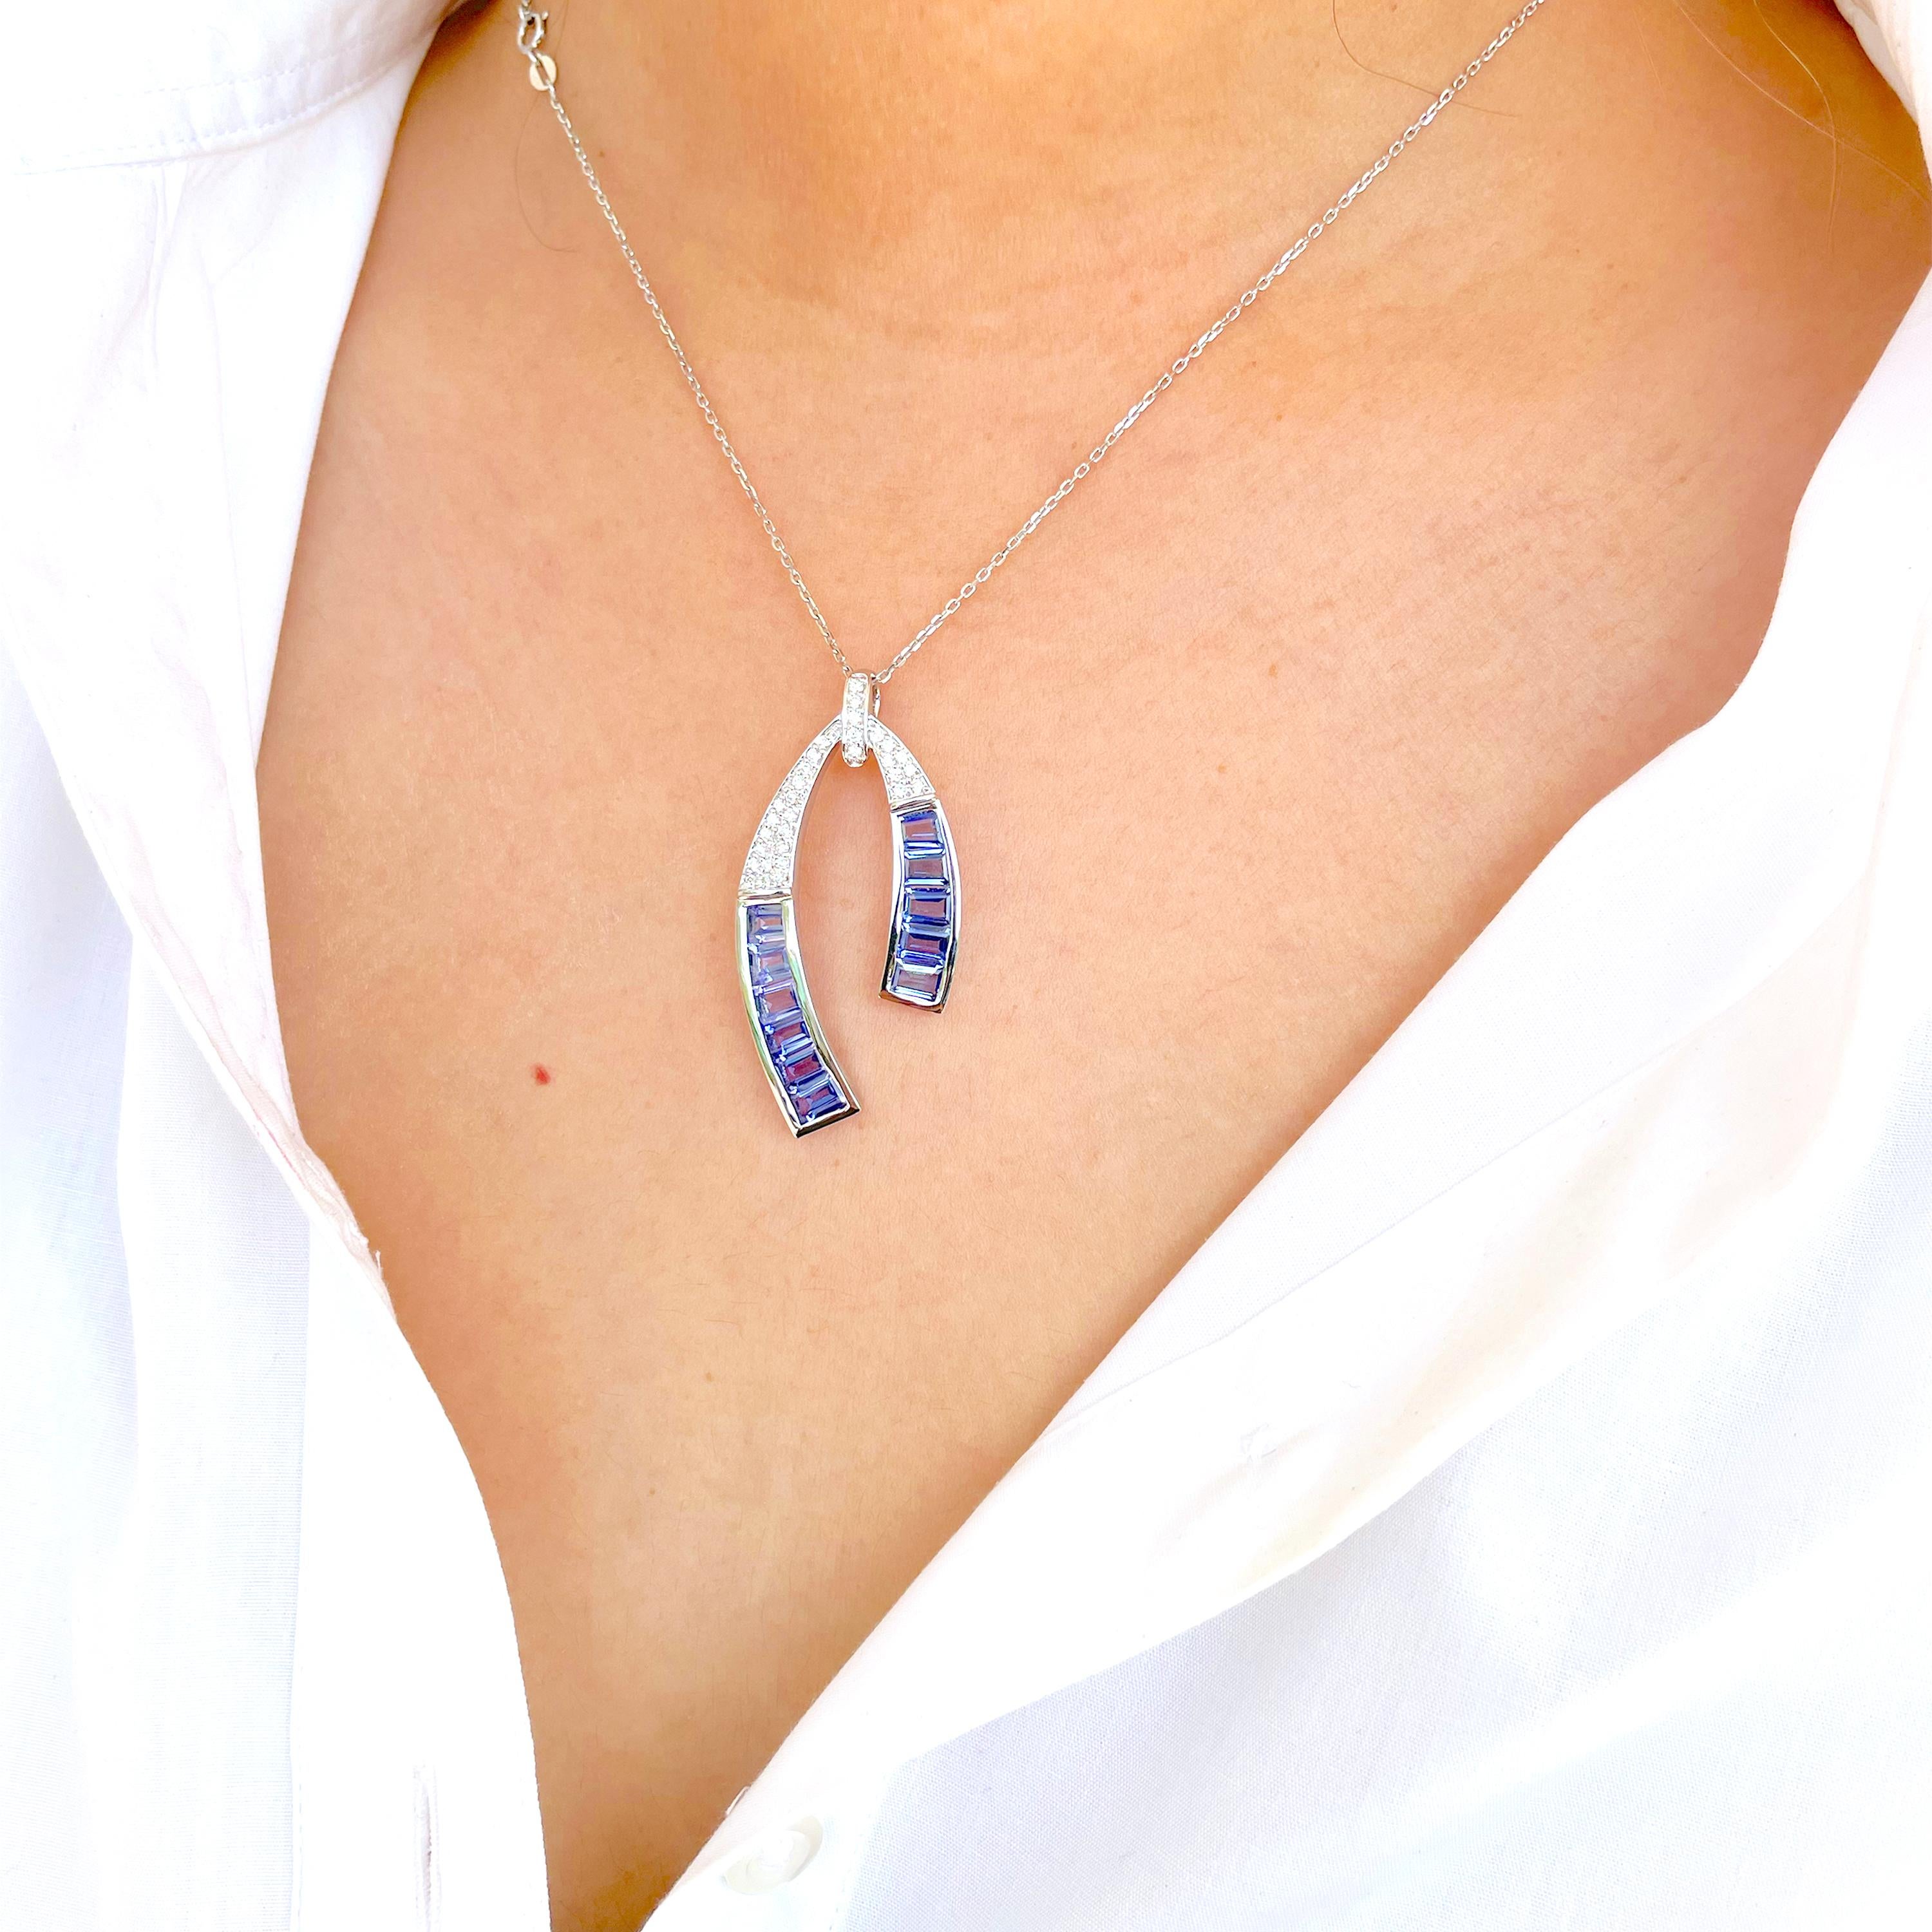 18 karat white gold tanzanite baguette diamond horseshoe pendant necklace

Inspired by the horse-shoe design, this pendant made in 18k white gold gives it a contemporary make-over. Line art clubbed with pave studded diamonds and vibrant custom-cut